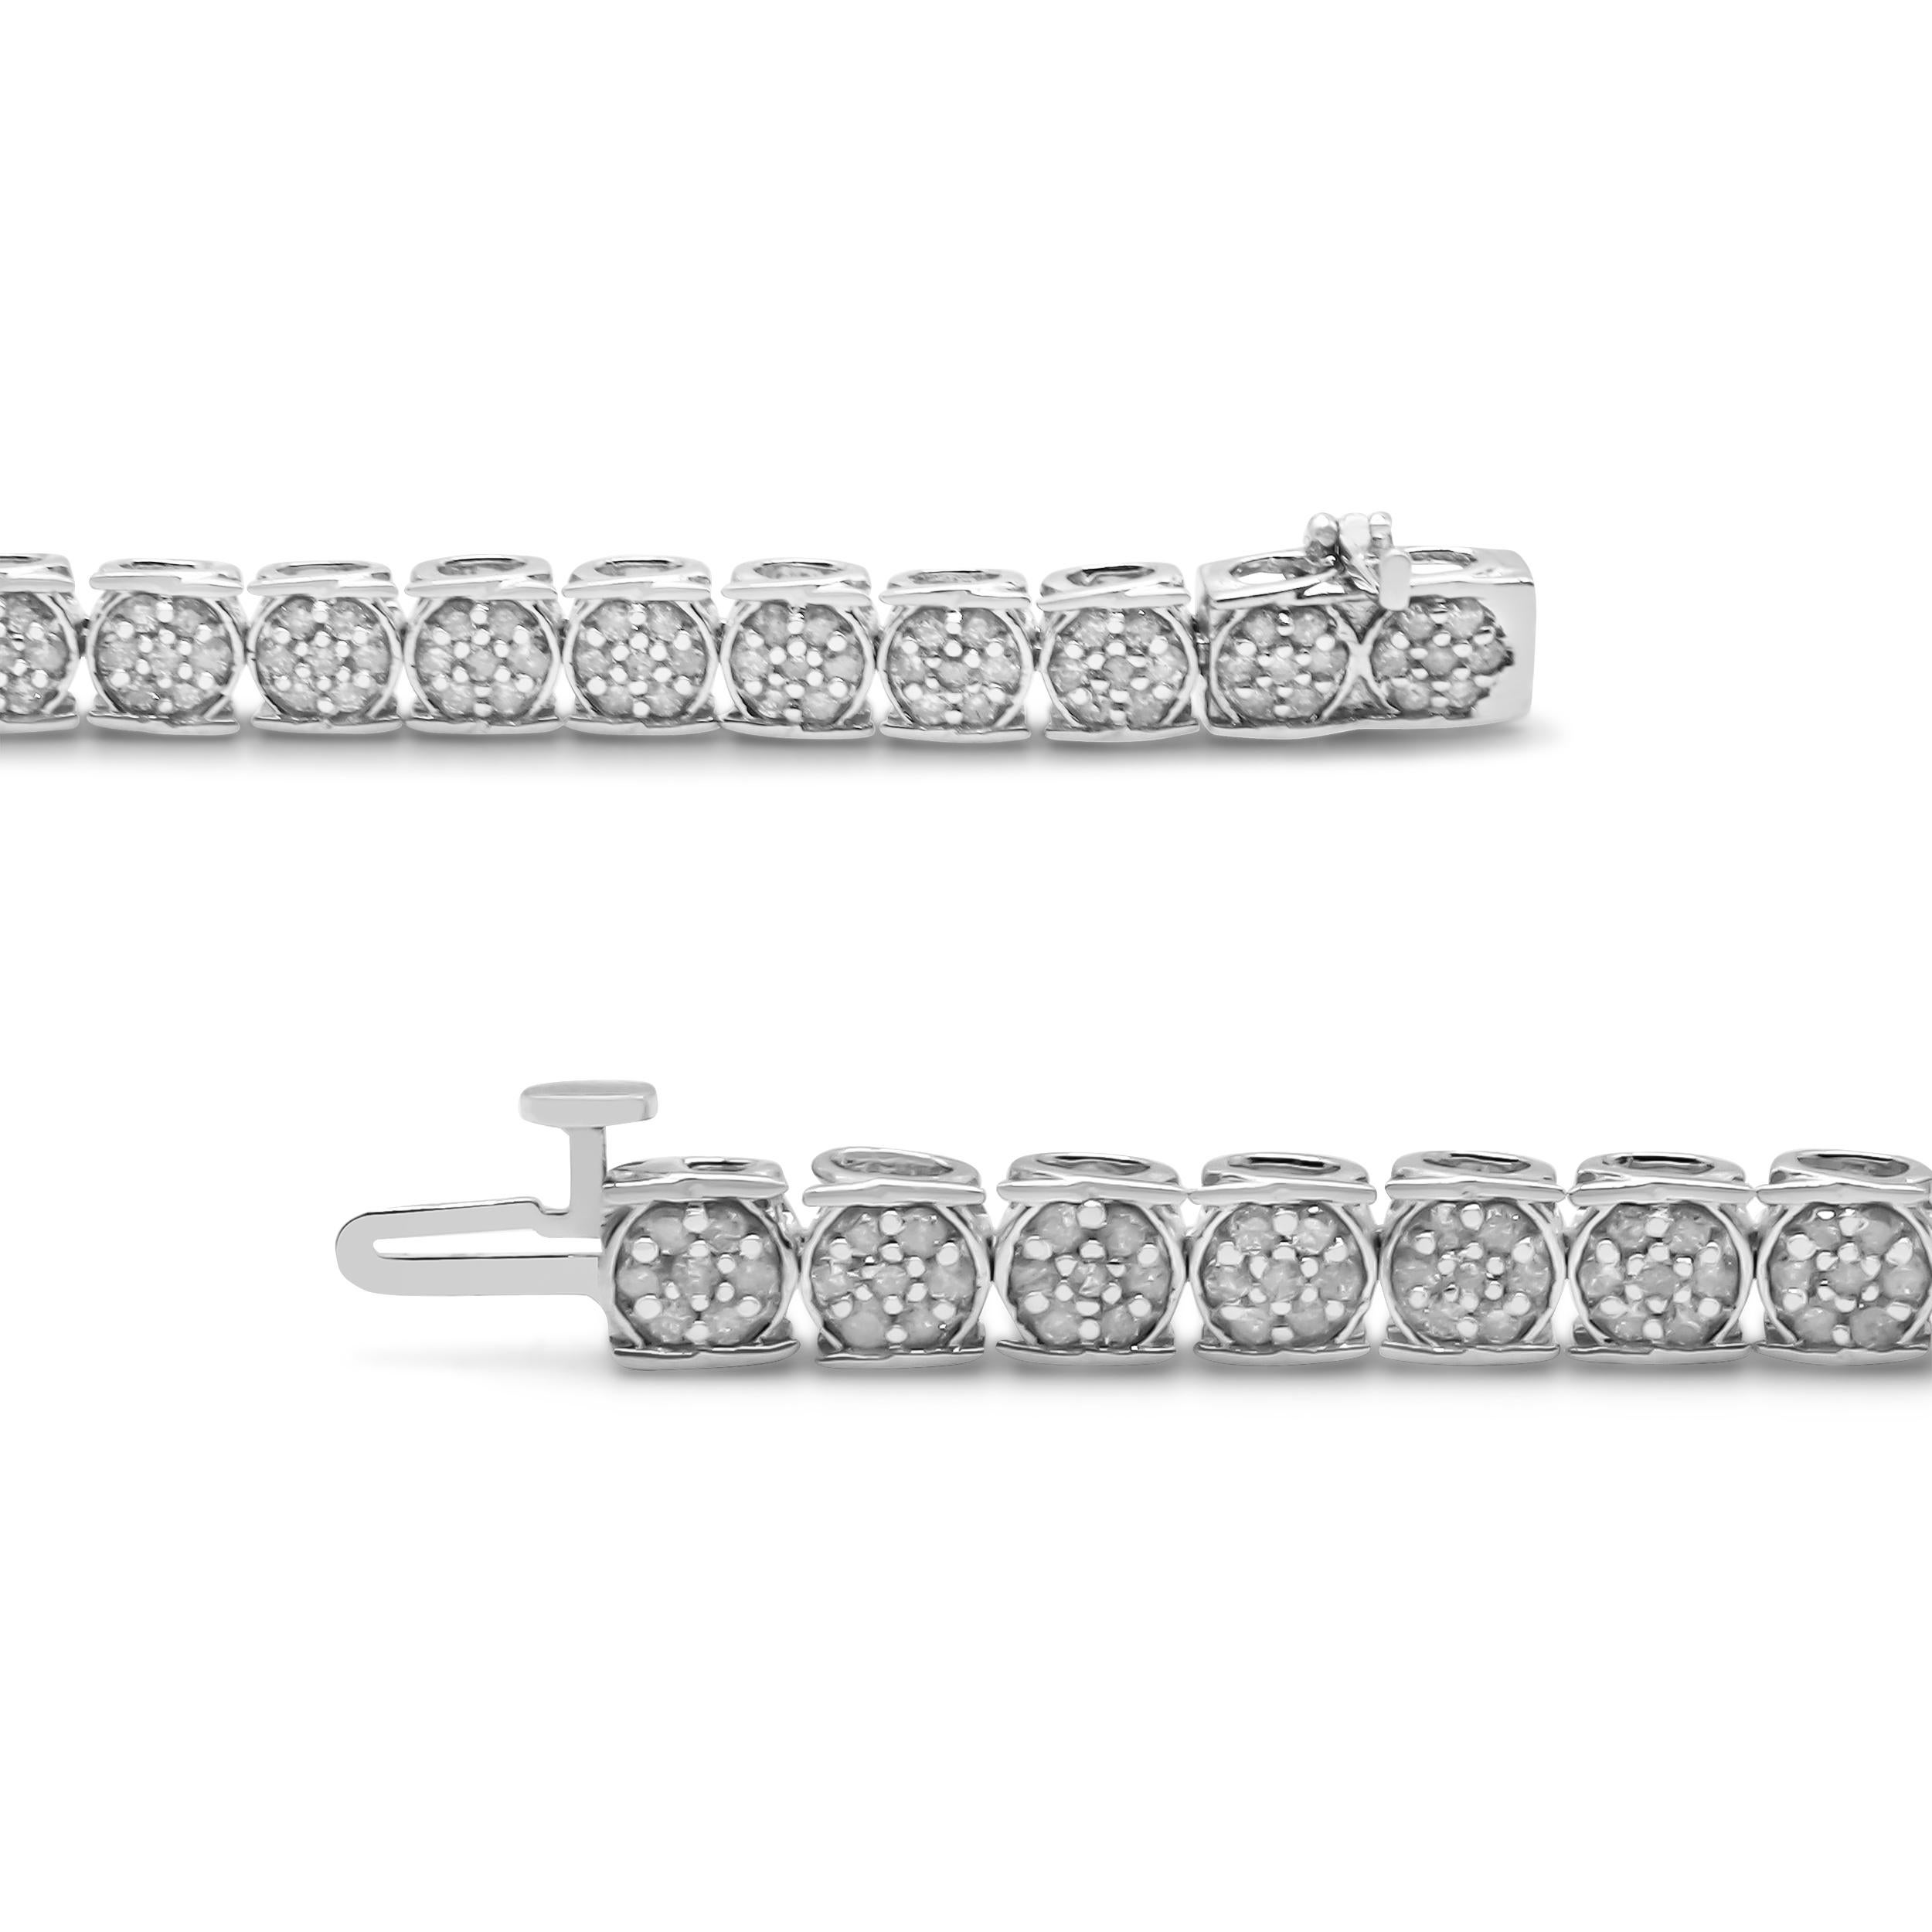 This sparkling link bracelet is a sophisticated treat for your jewelry collection. Styled in fine .925 sterling silver, the design shows off clusters of round, prong-set diamonds that form the look of a flower blossom within their rounded links.